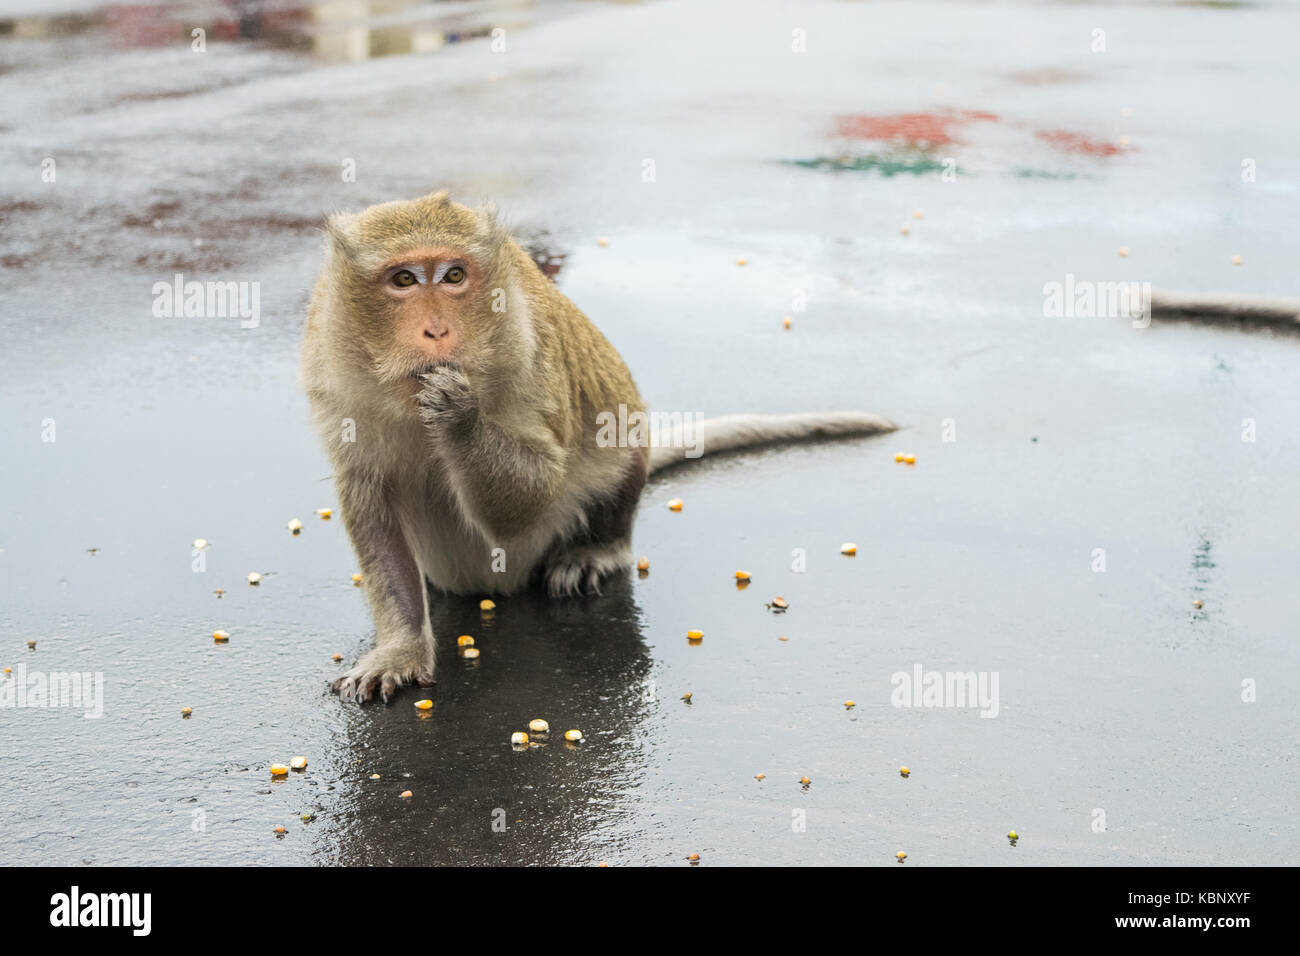 A macaque monkey slowly nibbling on corn seeds with its hands in front of its mouth. Monkey fed by tourists in Phnom Penh, Cambodia, South East Asia Stock Photo